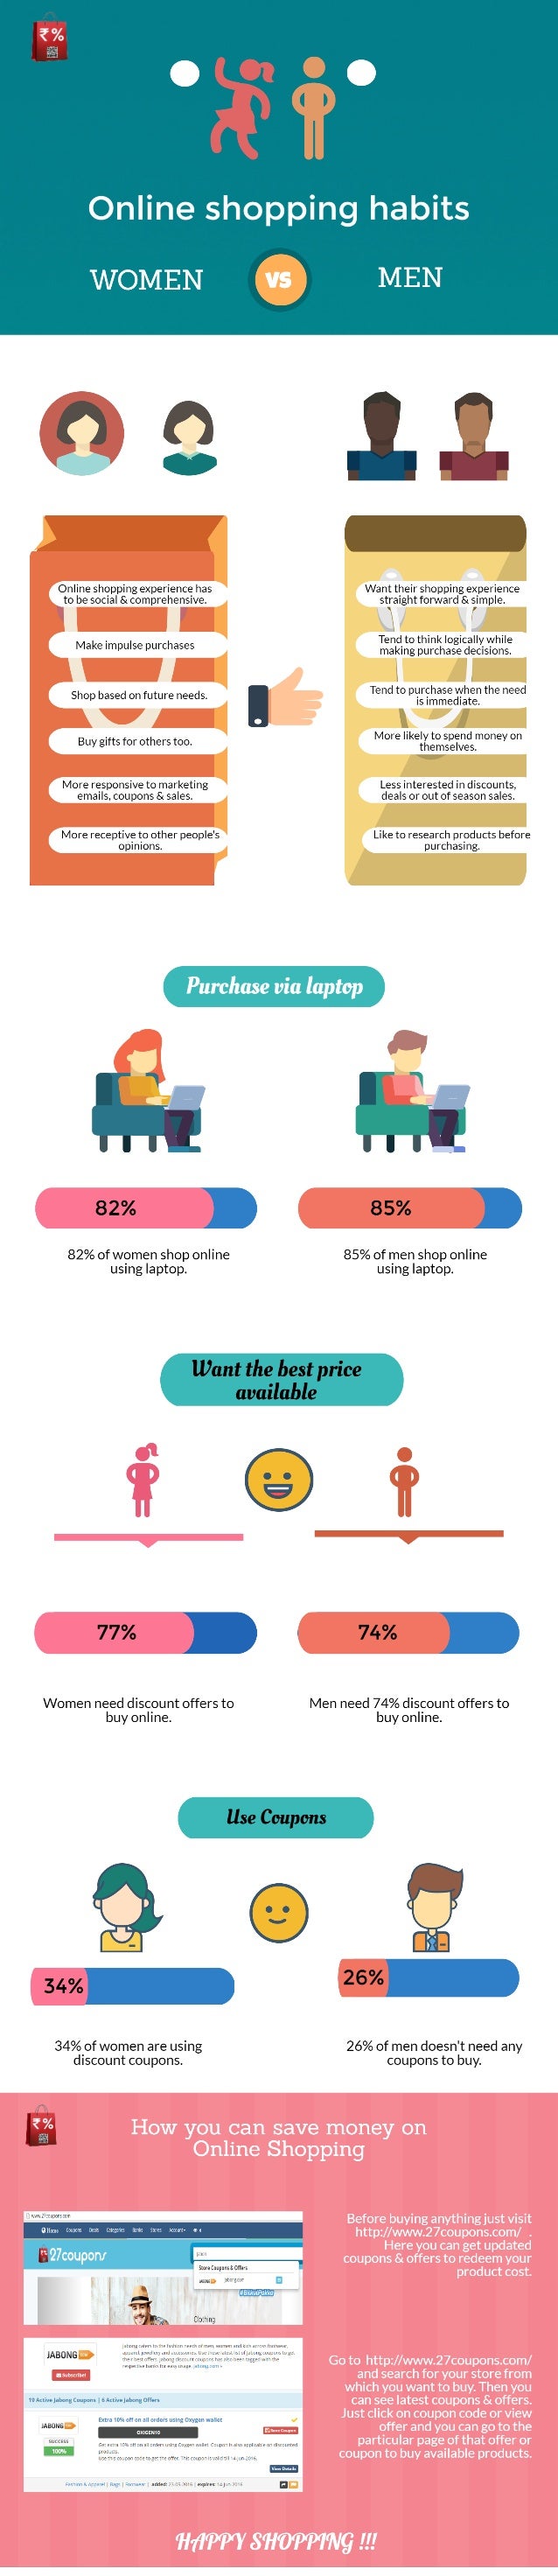 Differences In Shopping Habits Of Men And Women 66